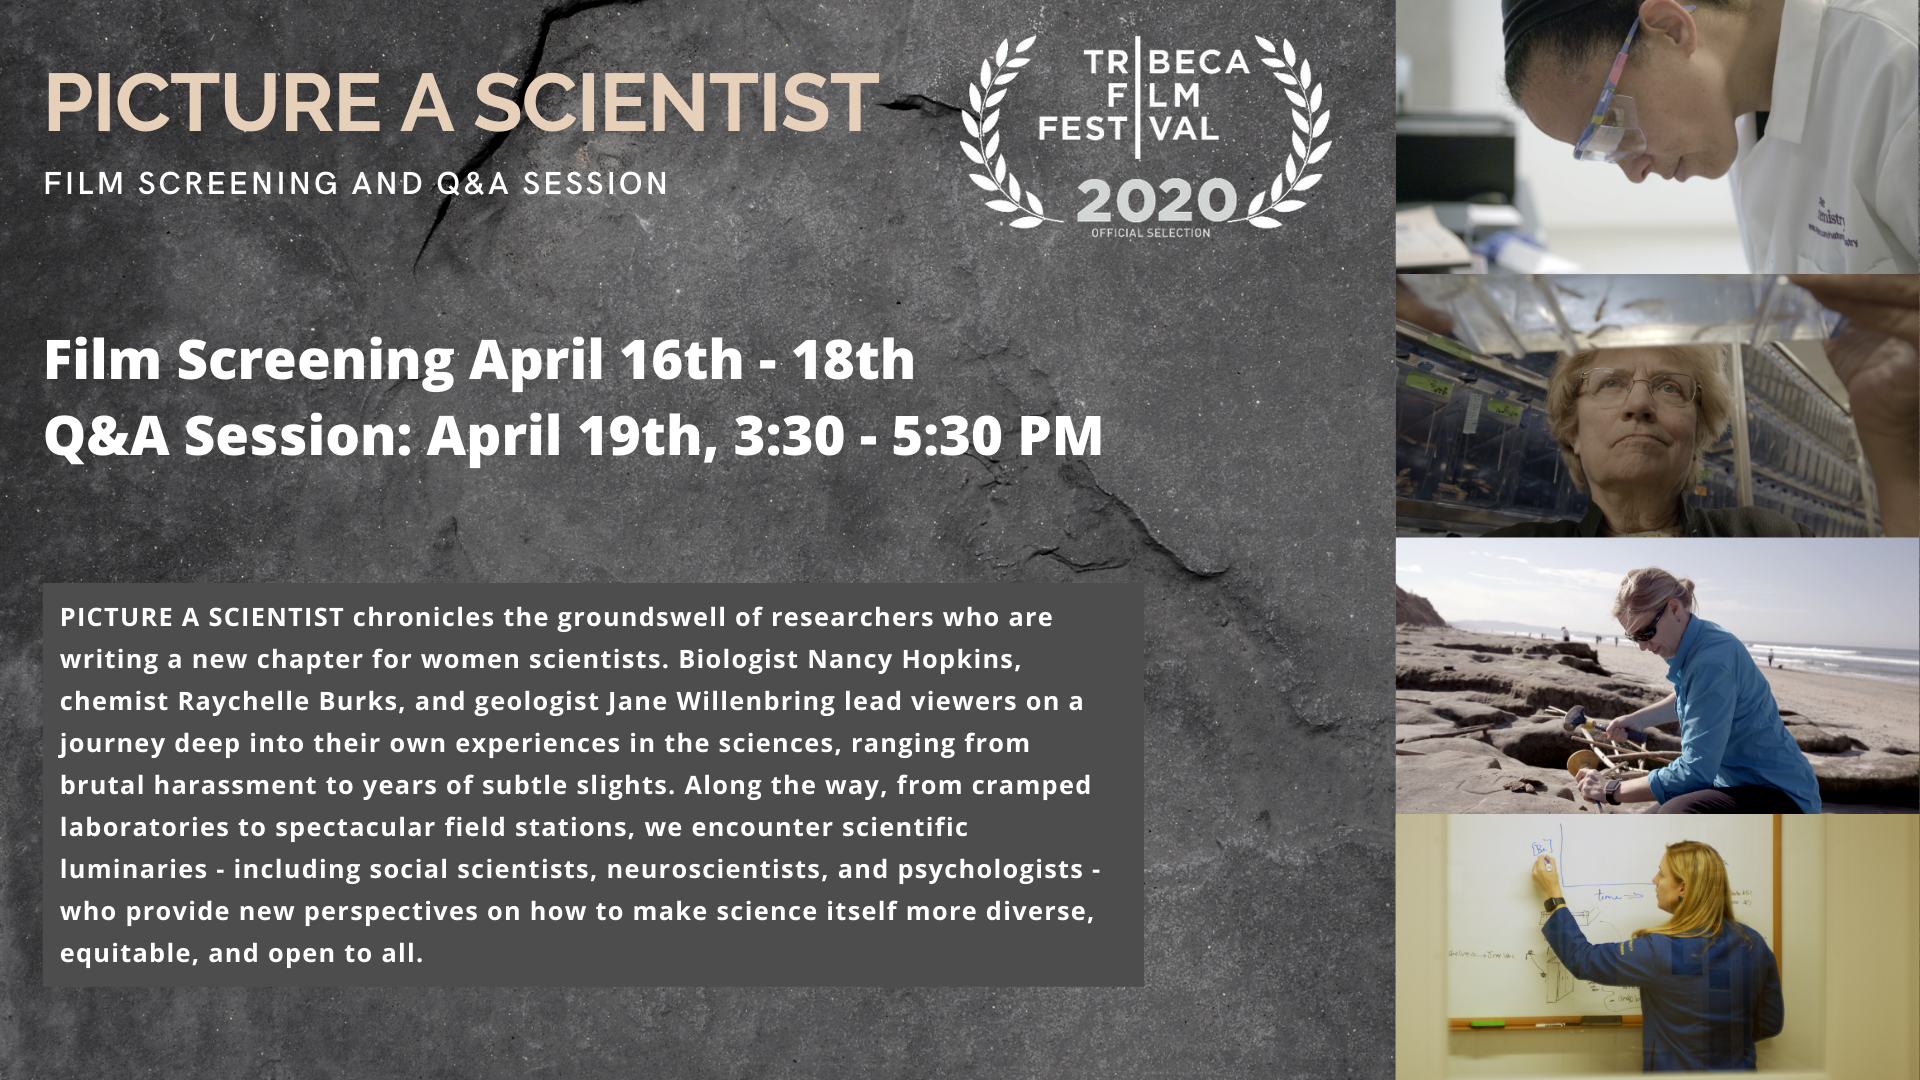 Images of four women and text on a gray background, Picture a Scientist Film Screening April 16-18 and Q&A Session April 19 3:30-5:00pmET, Tribeca Film Festival 2020 Official Selection. Text description available at: https://events.cornell.edu/event/picture_a_scientist_film_viewing_and_qa_panel